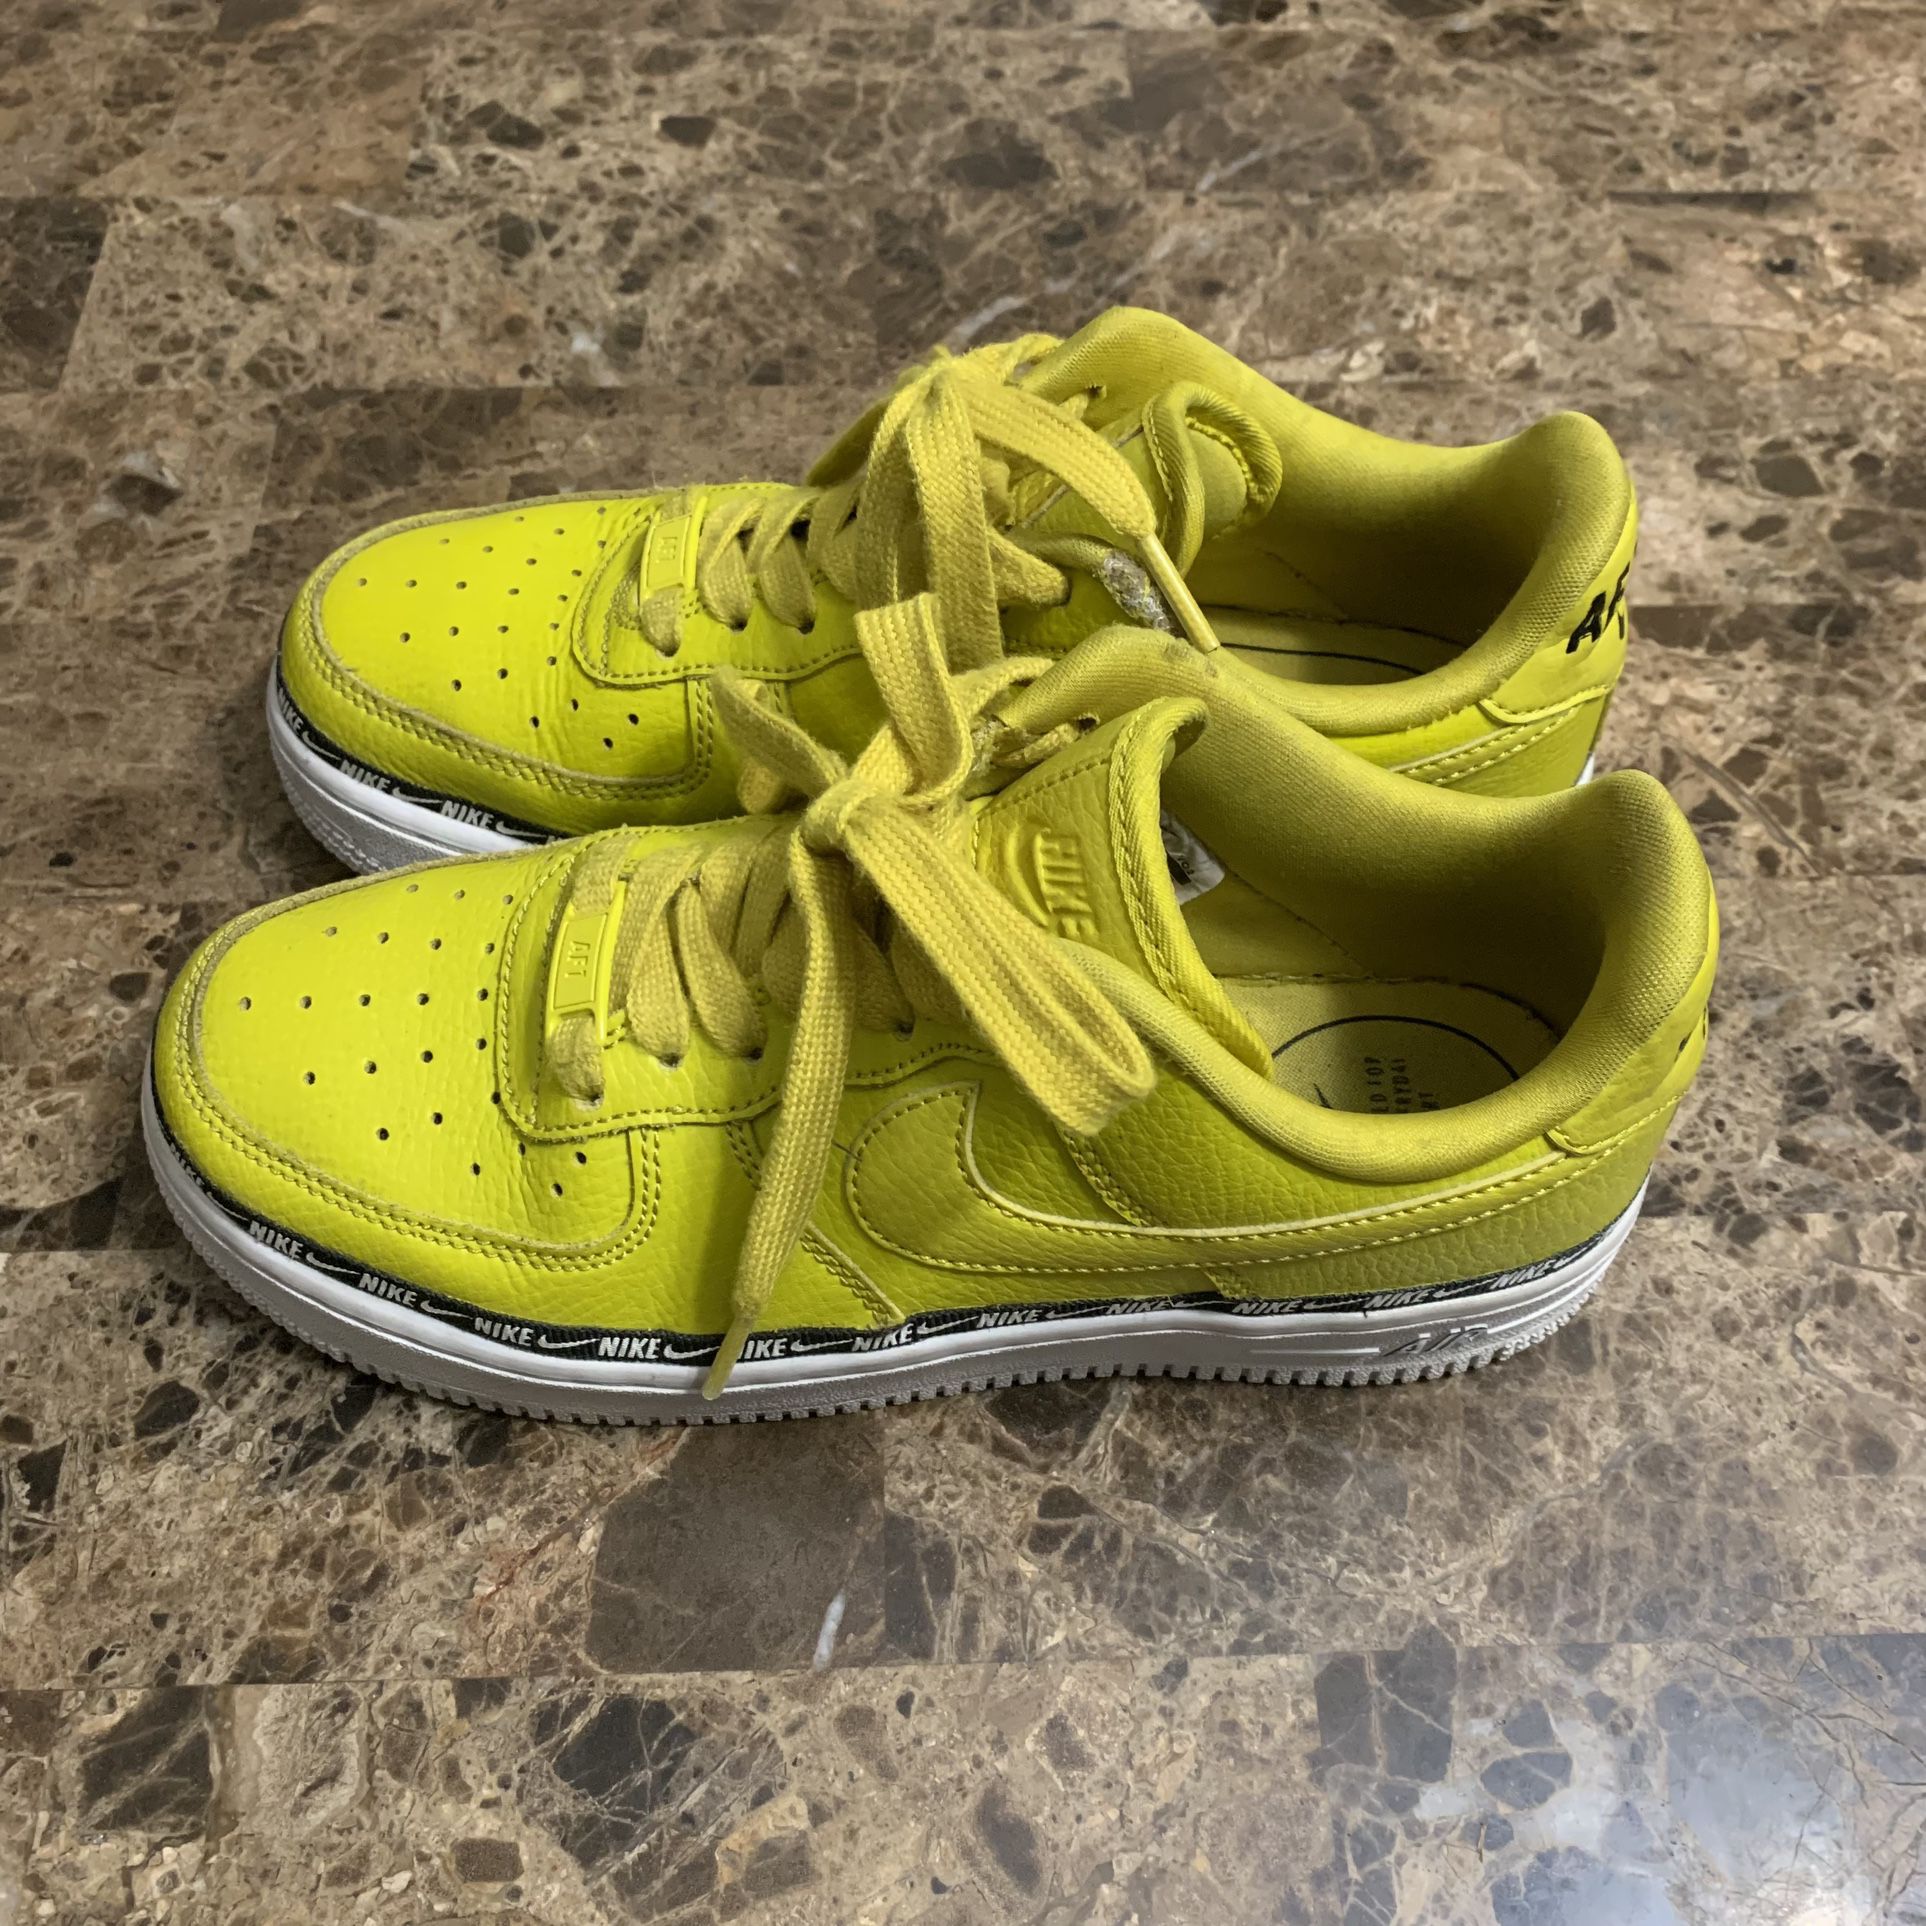 Nike Air 1 07 SE Premium Overbranded for Sale in Orlando, FL - OfferUp